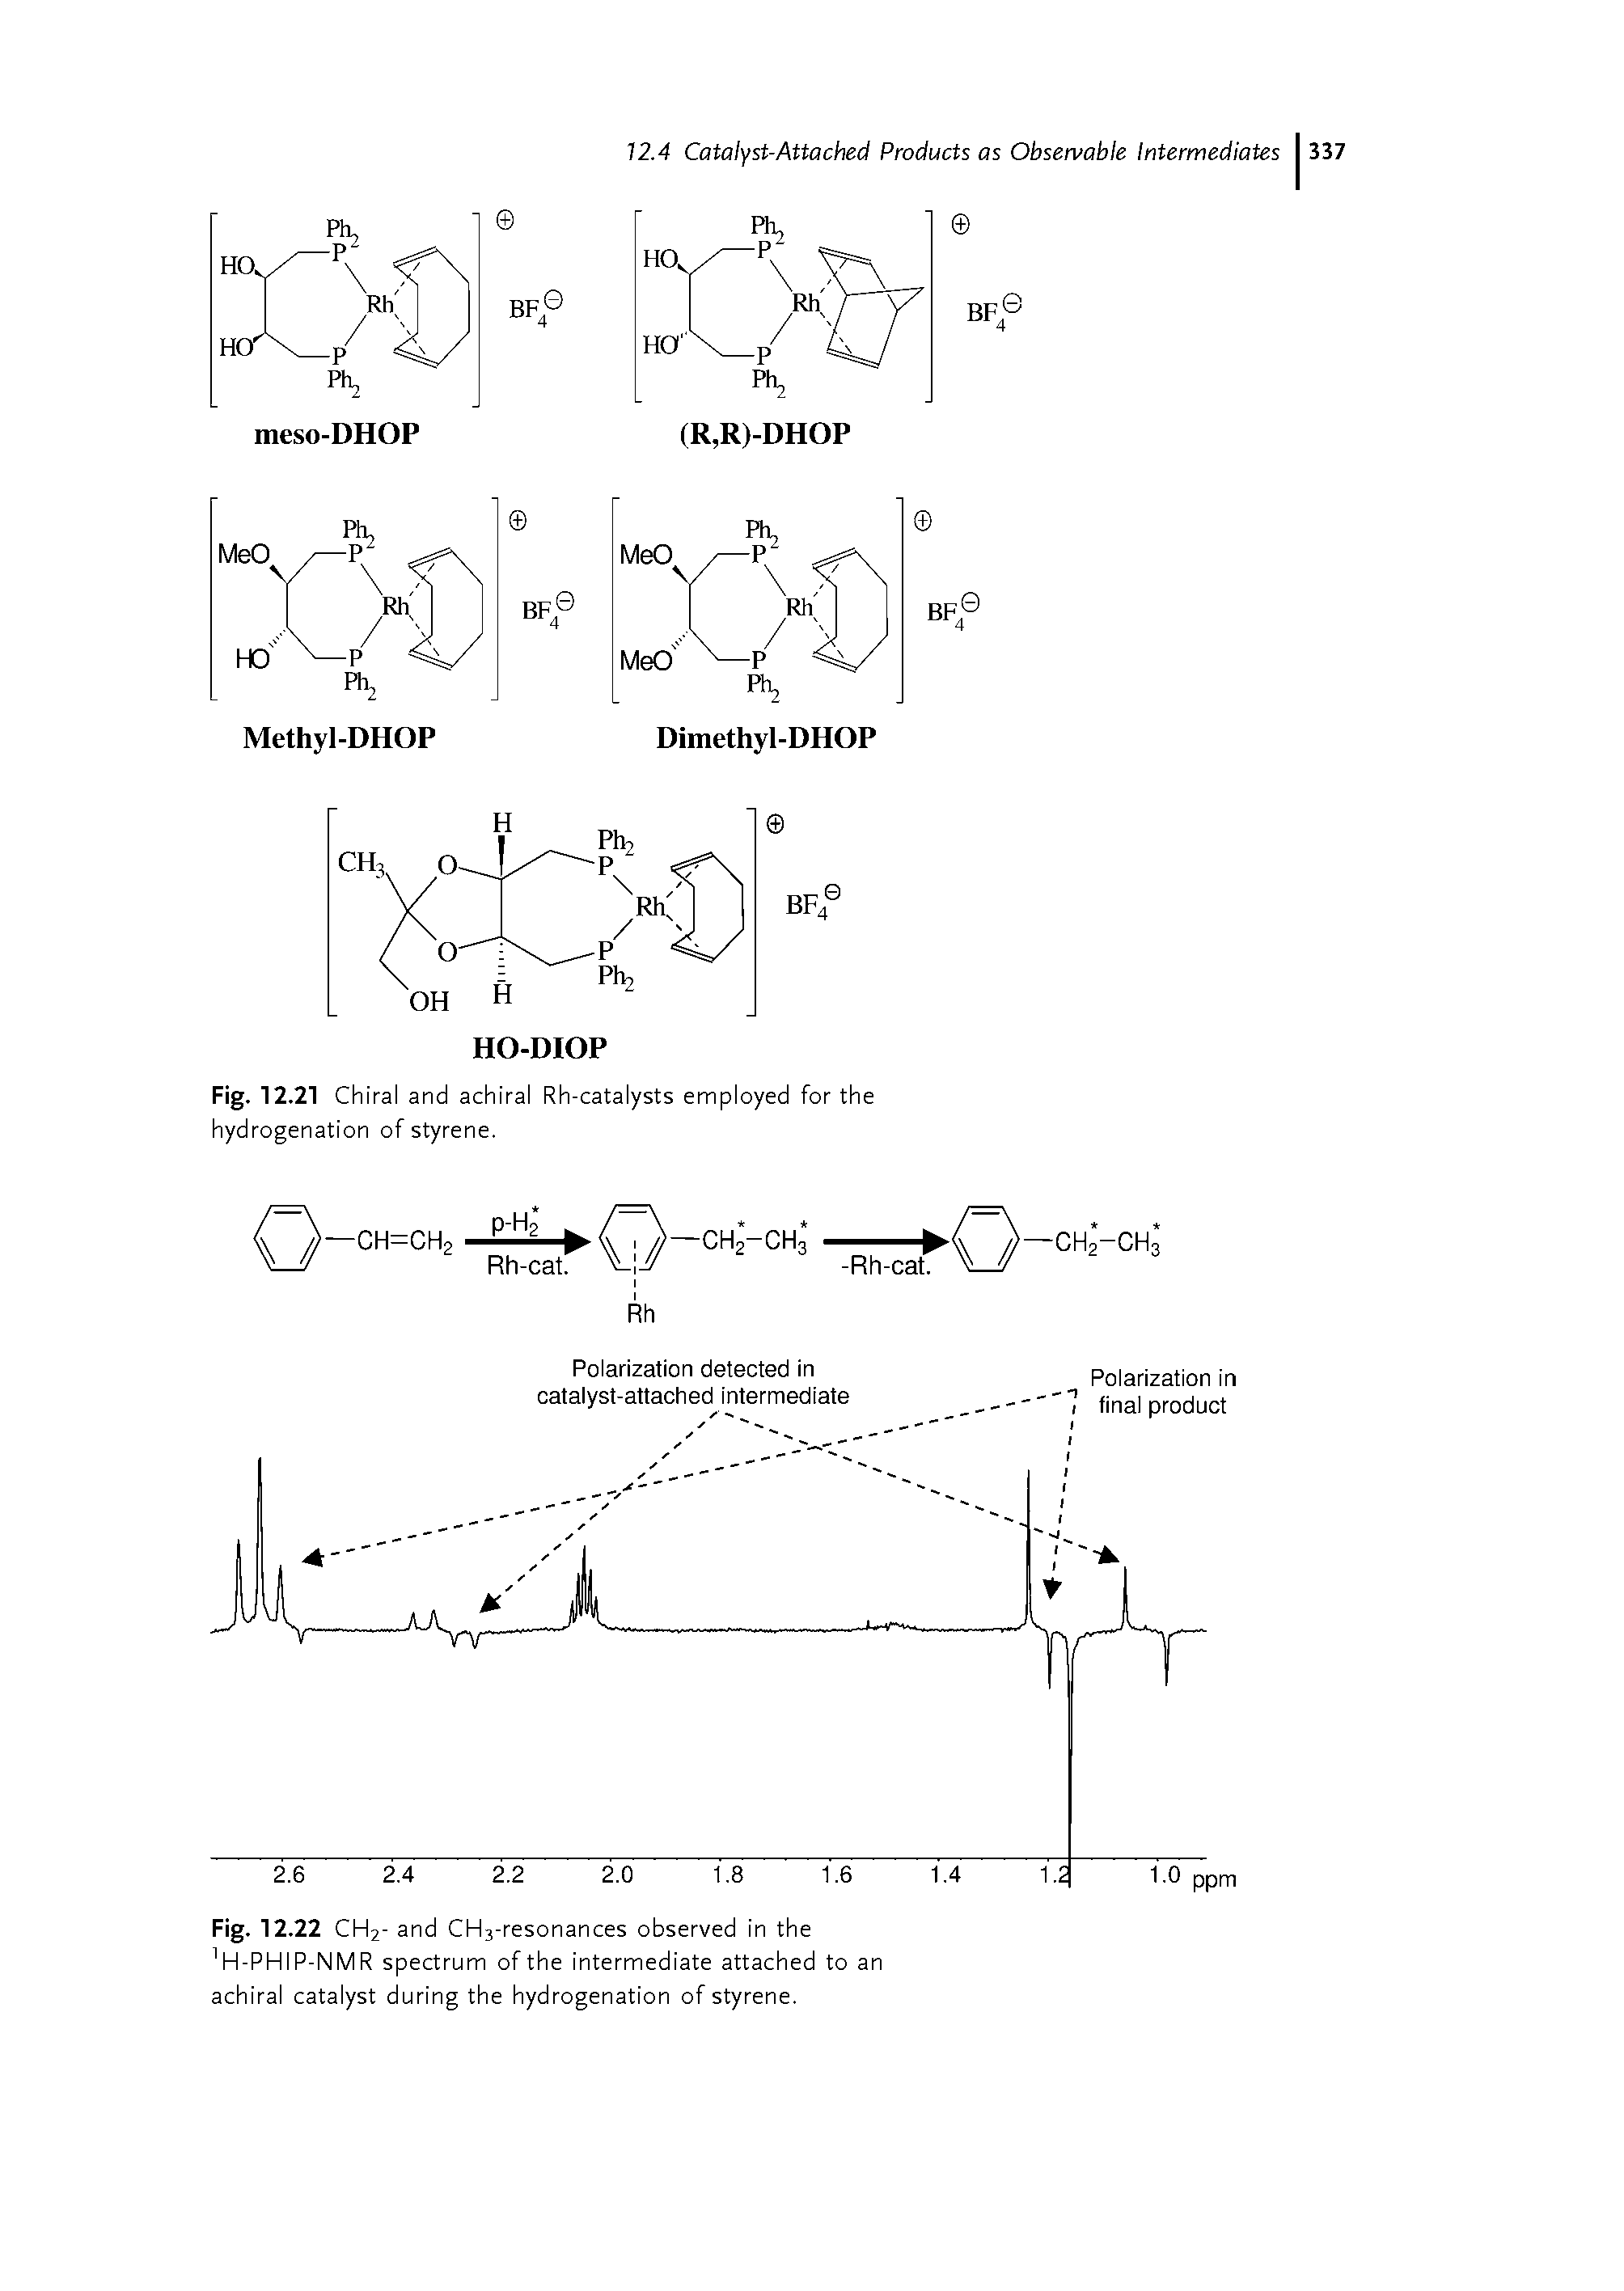 Fig. 12.21 Chiral and achiral Rh-catalysts employed for the hydrogenation of styrene.